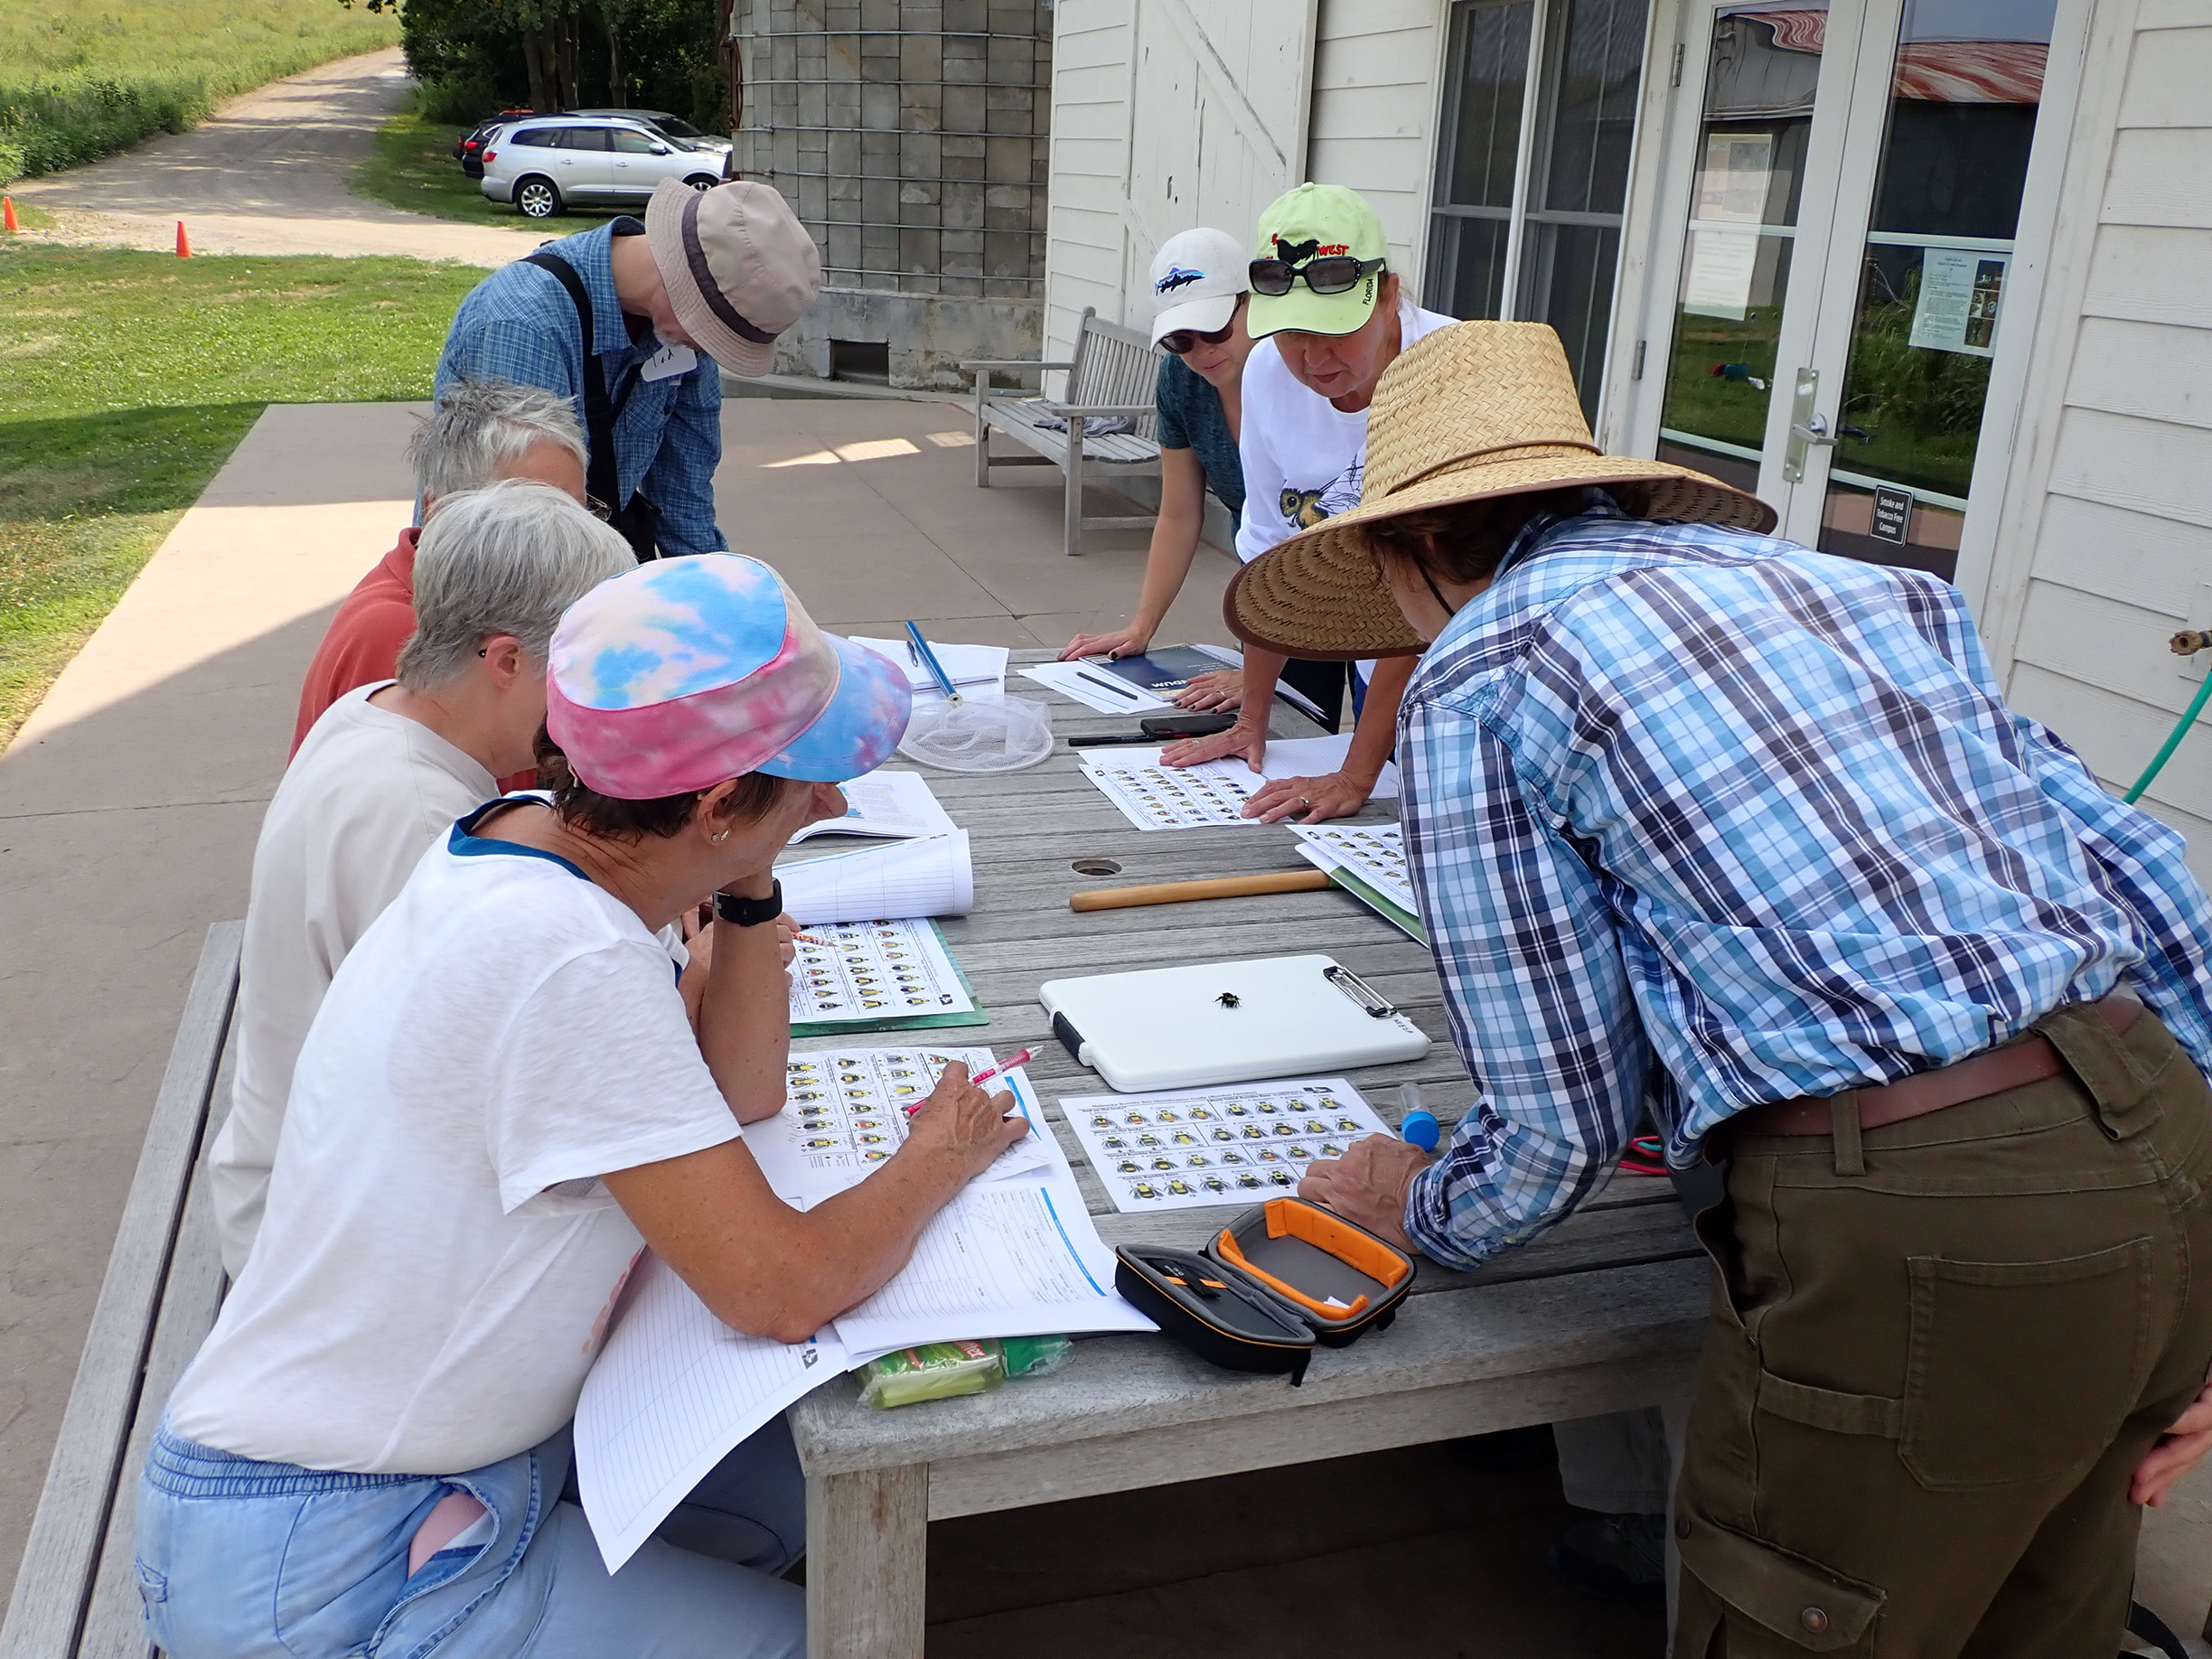 "Community scientists attending a training for the Nebraska Bumble Bee Atlas learn how to identify bumble bees before conducting surveys on their own. "